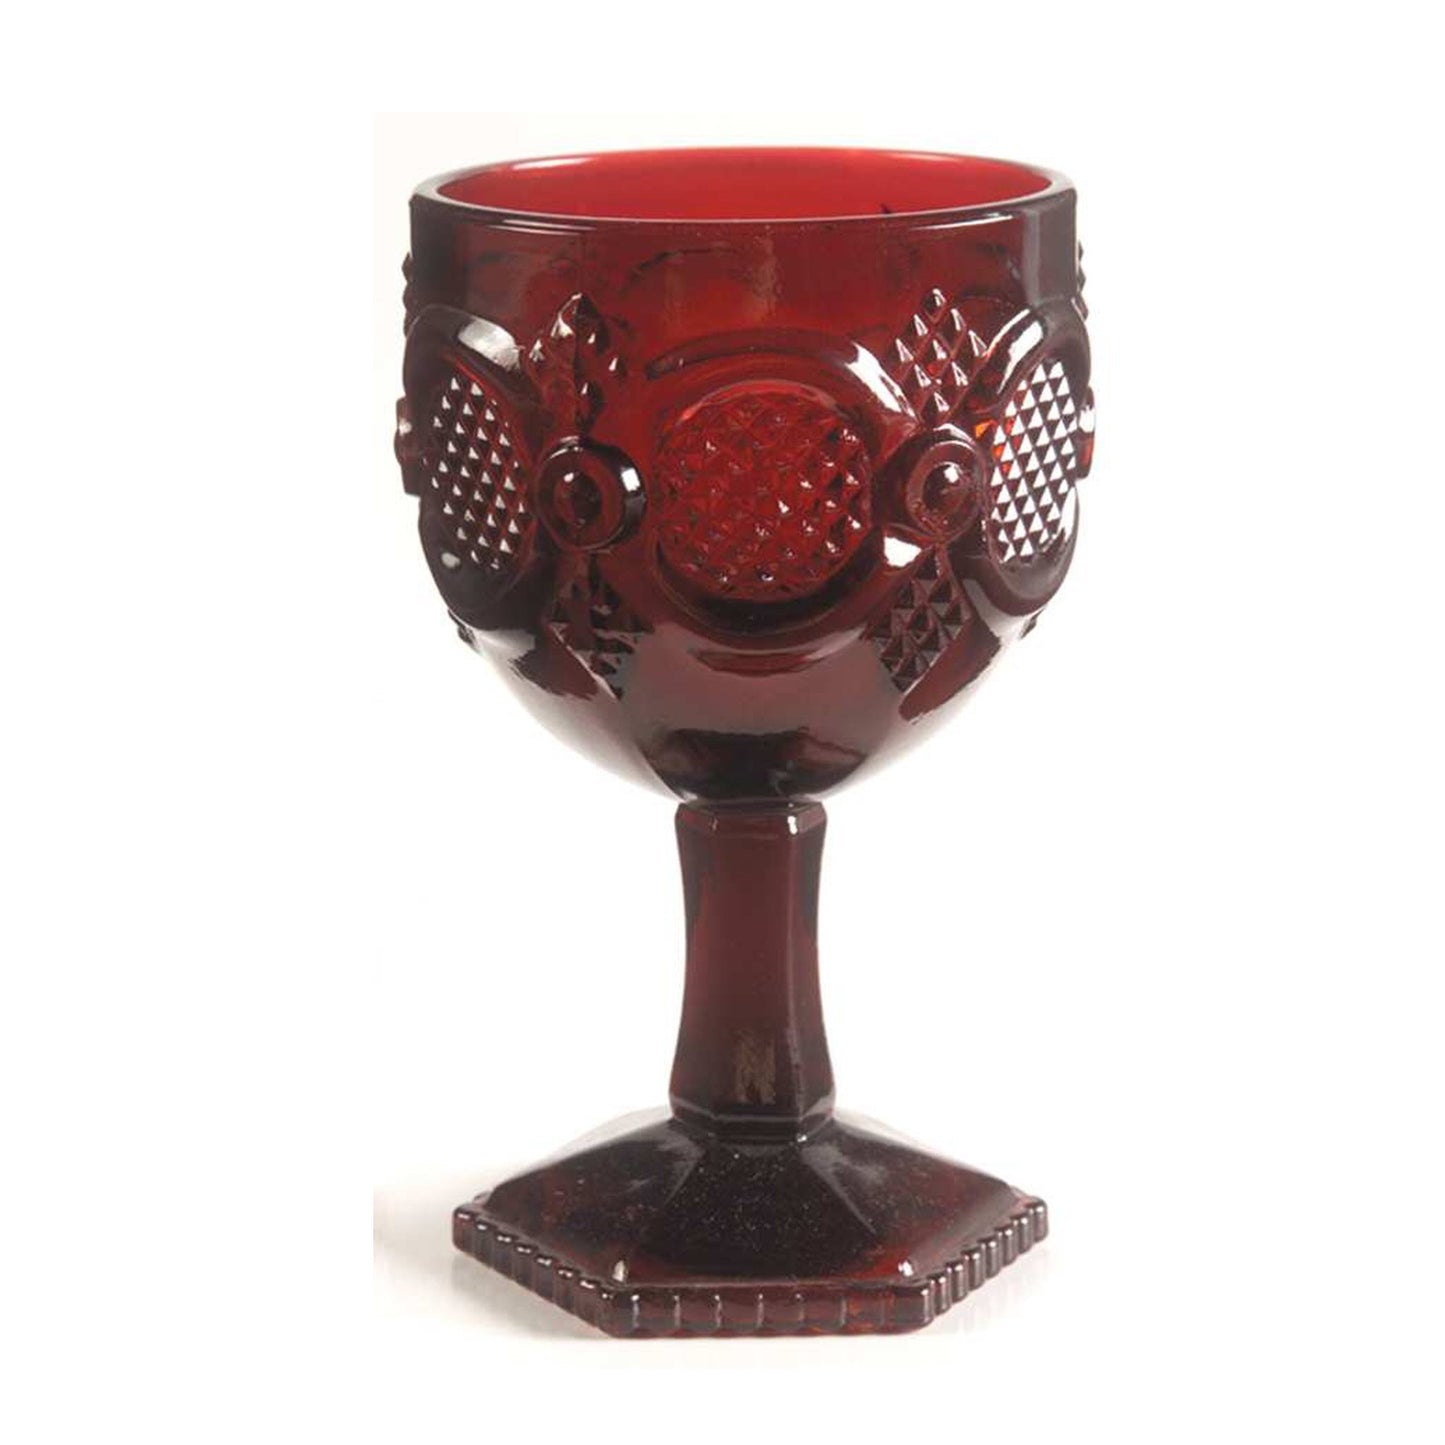 CAPE COD 1876 COLLECTION By Avon Water Goblet